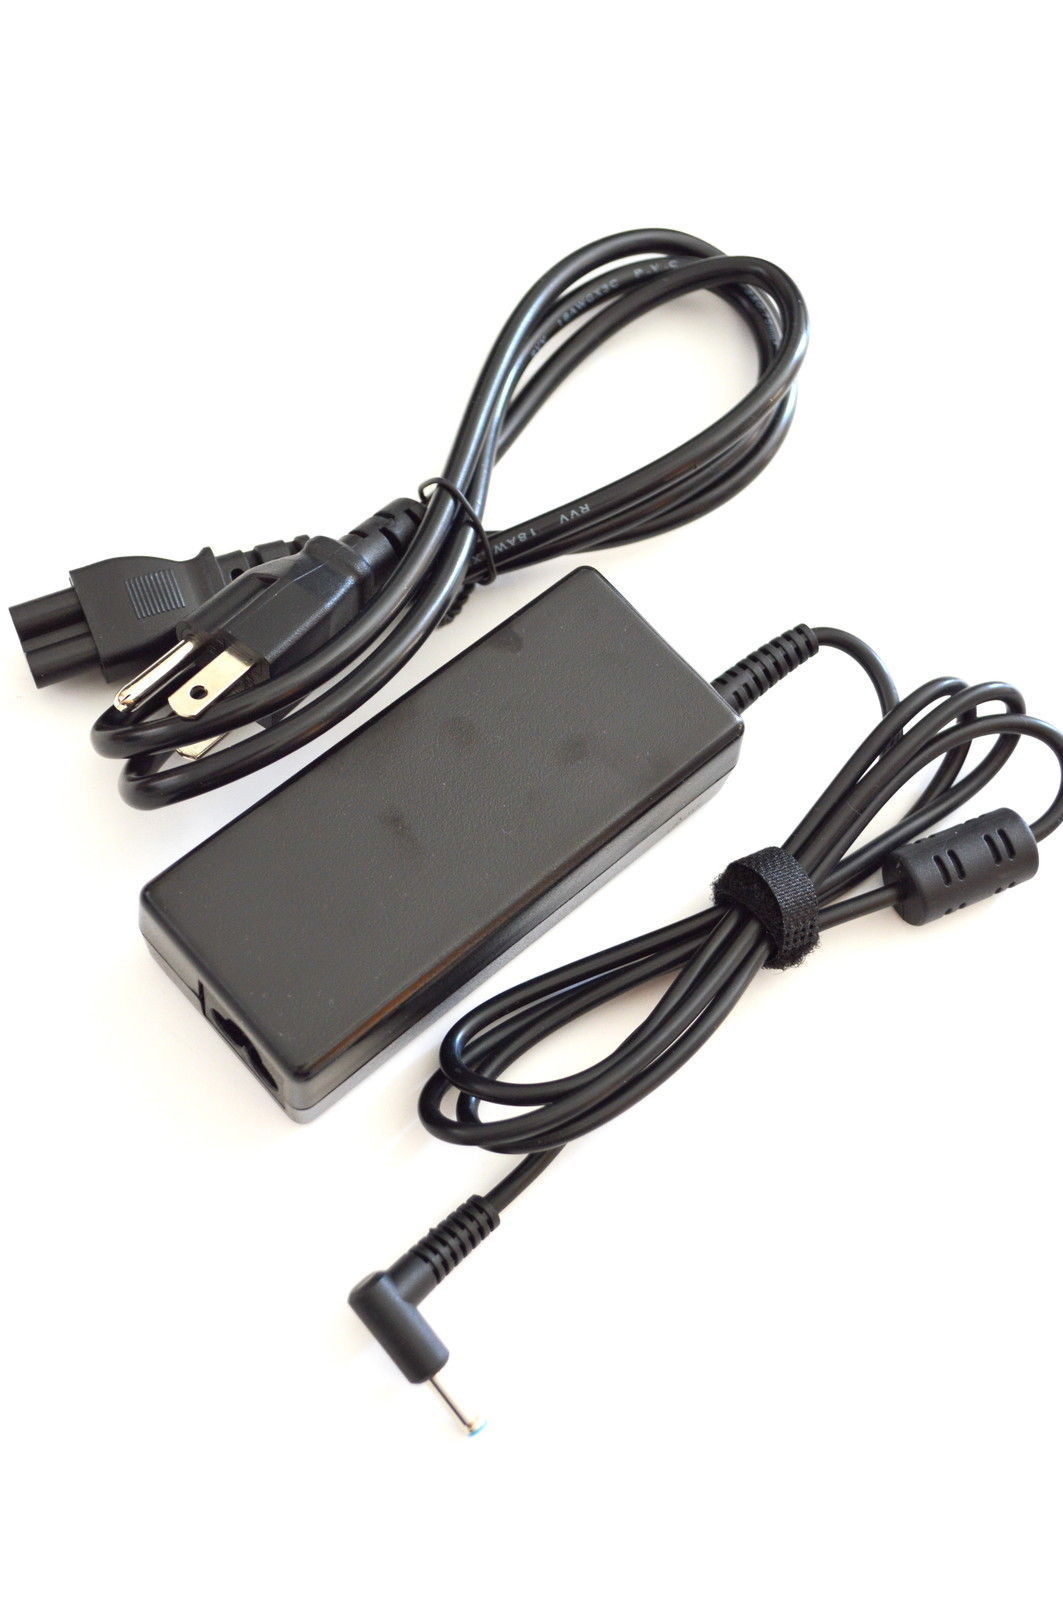 Primary image for AC Adapter Charger for HP Pavilion 17-g127ds 17-g128ds 17-g129ds Laptop Power